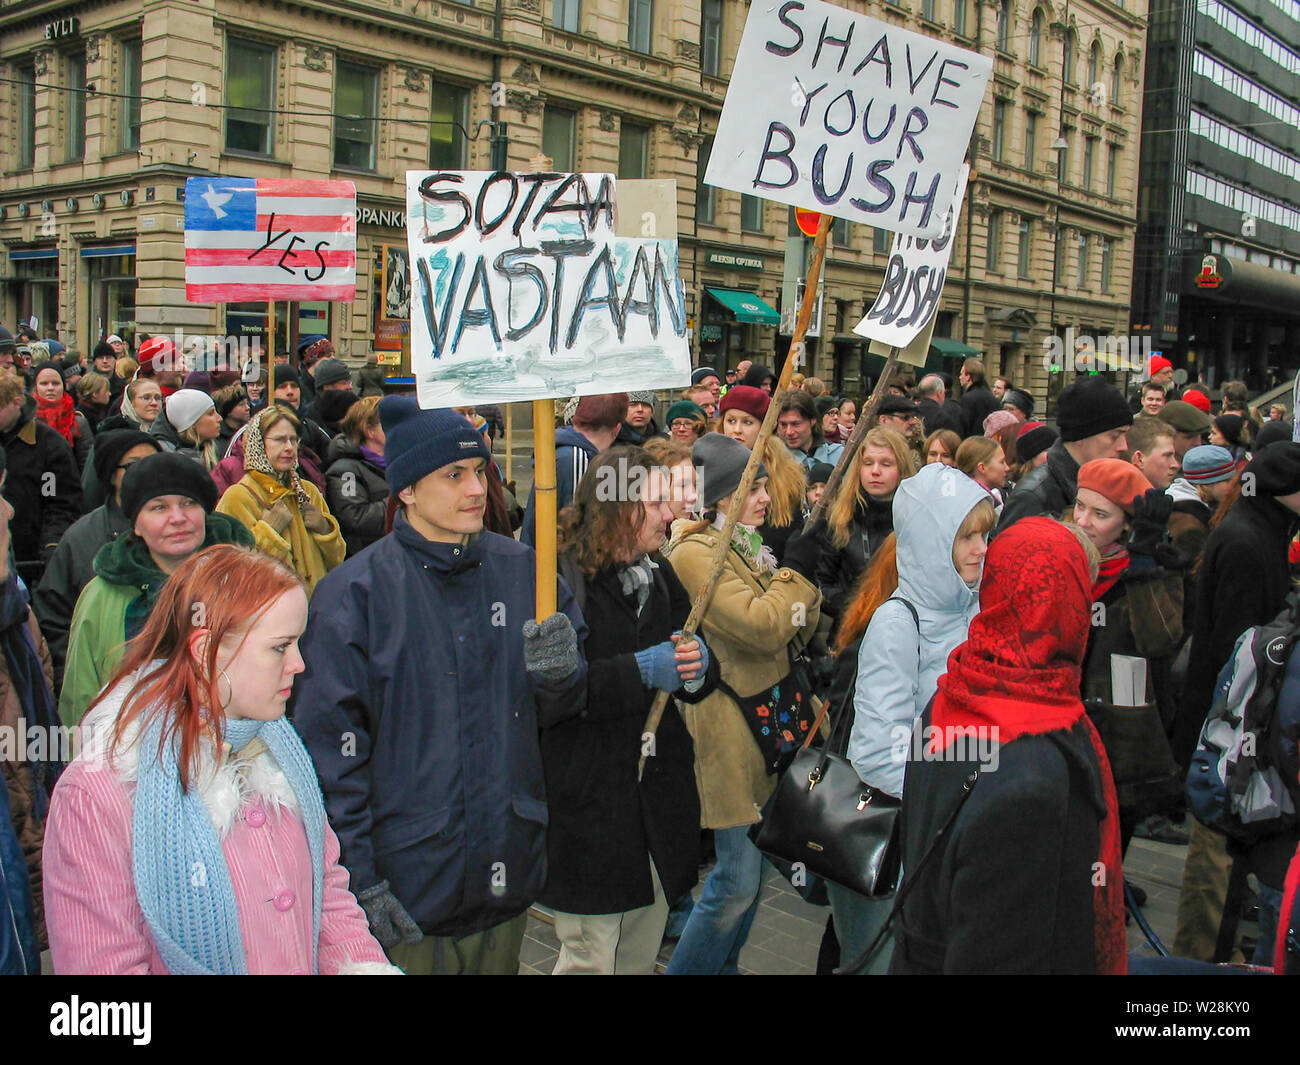 Helsinki, Finland - March 22, 2003: Anti-war protesters march through downtown Helsinki to protest the impending United States invasion of Iraq. Stock Photo